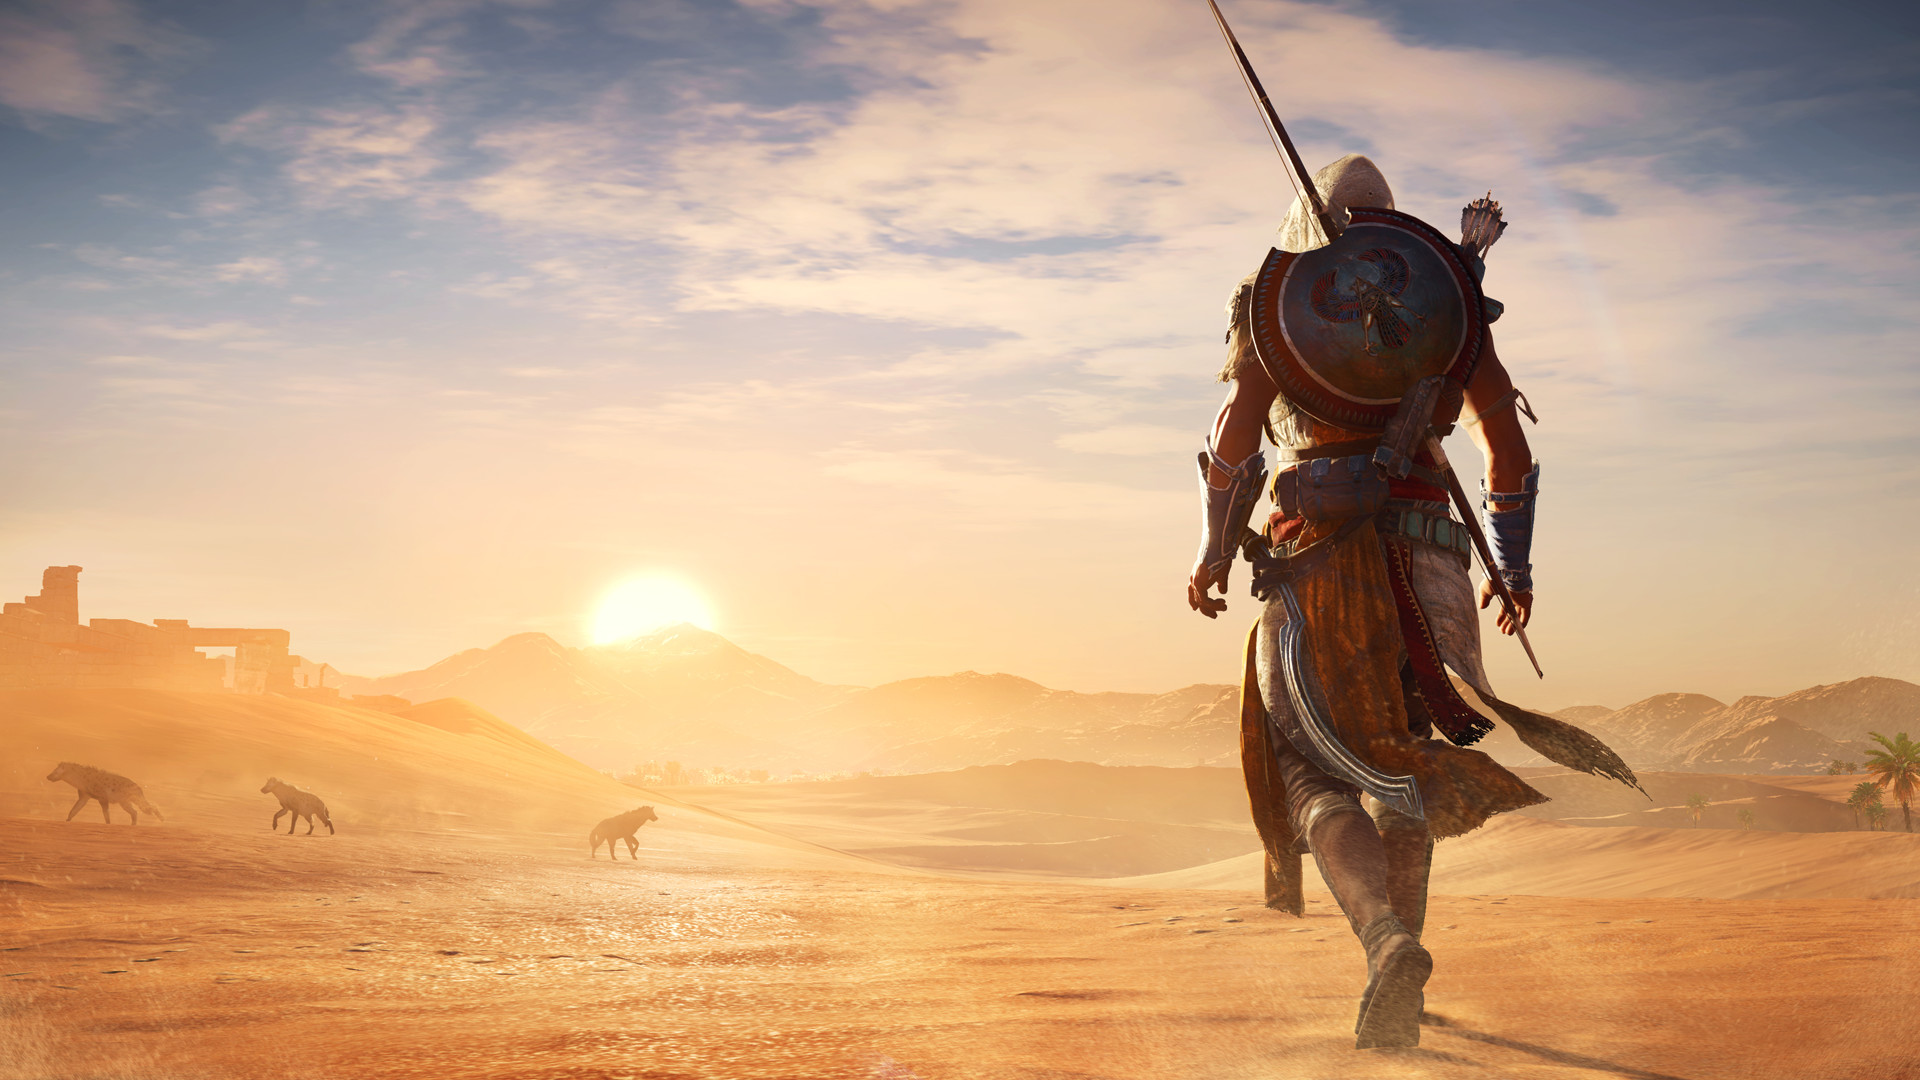 Find the best laptops for Assassin's Creed Origins